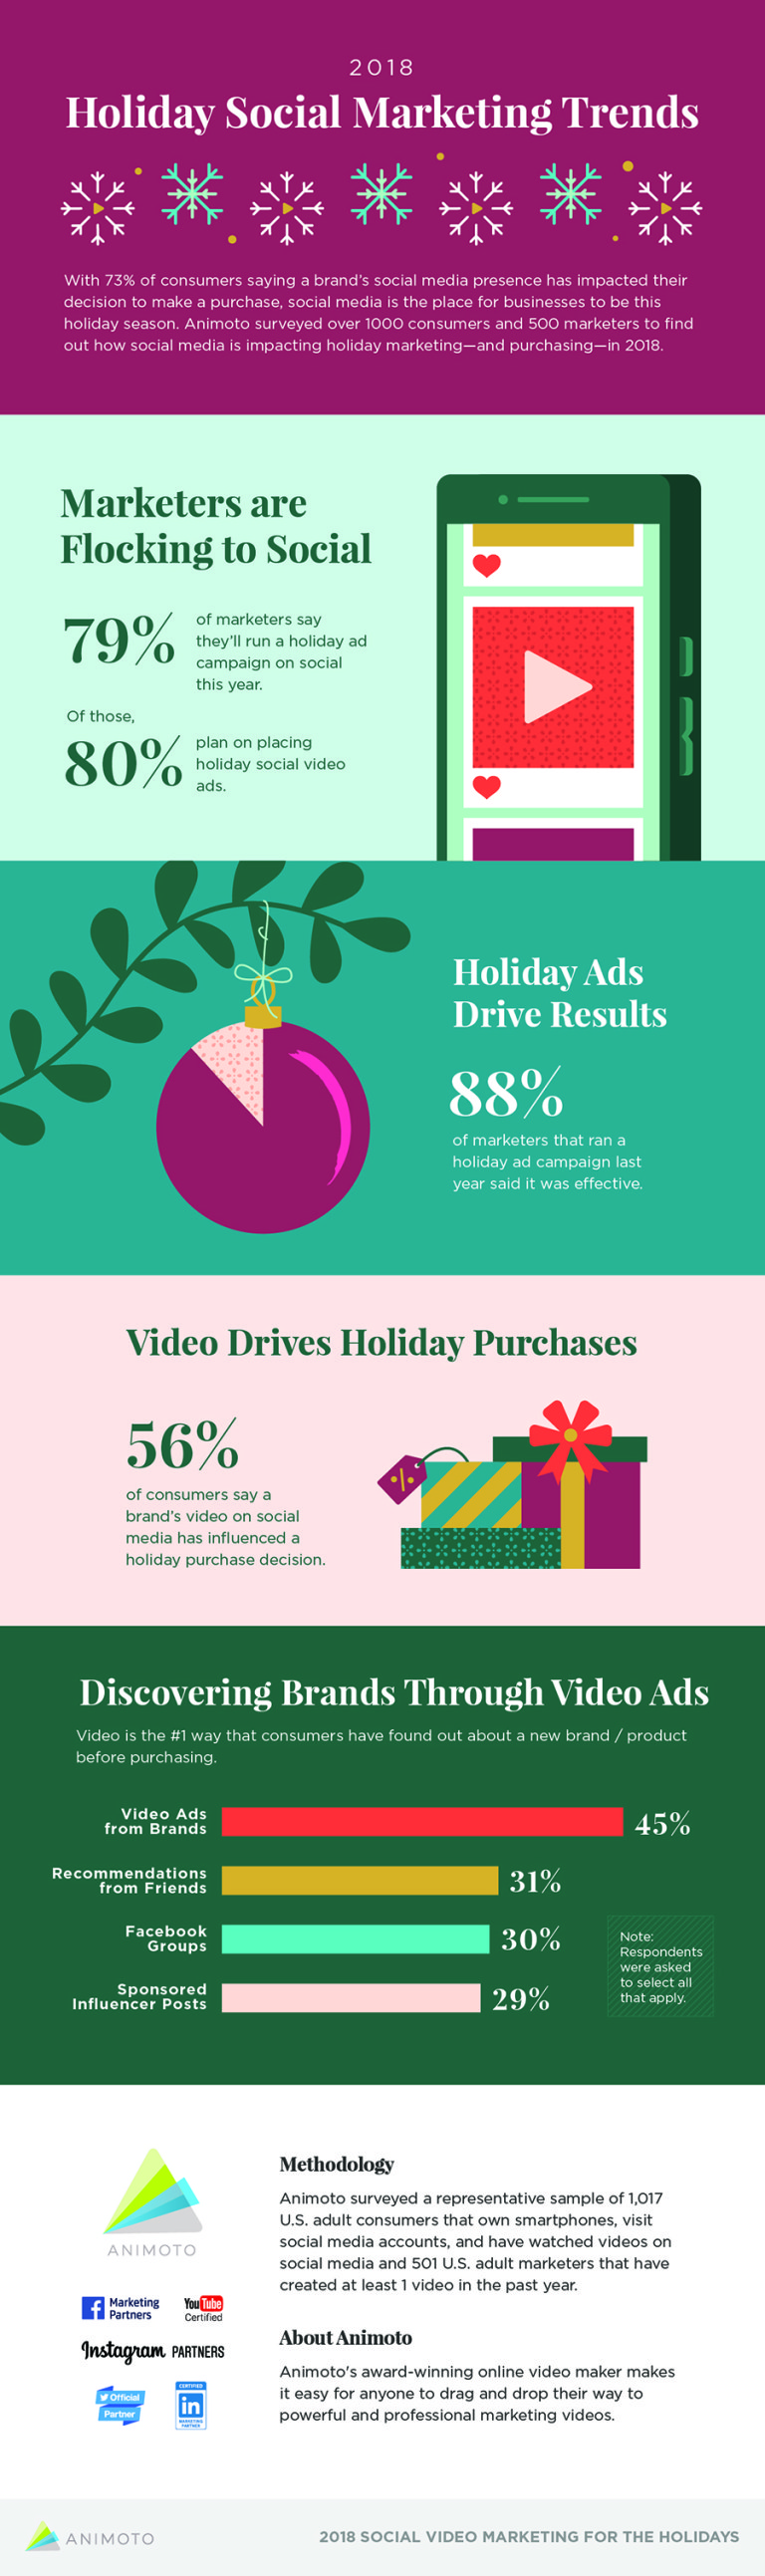 holiday marketing trends